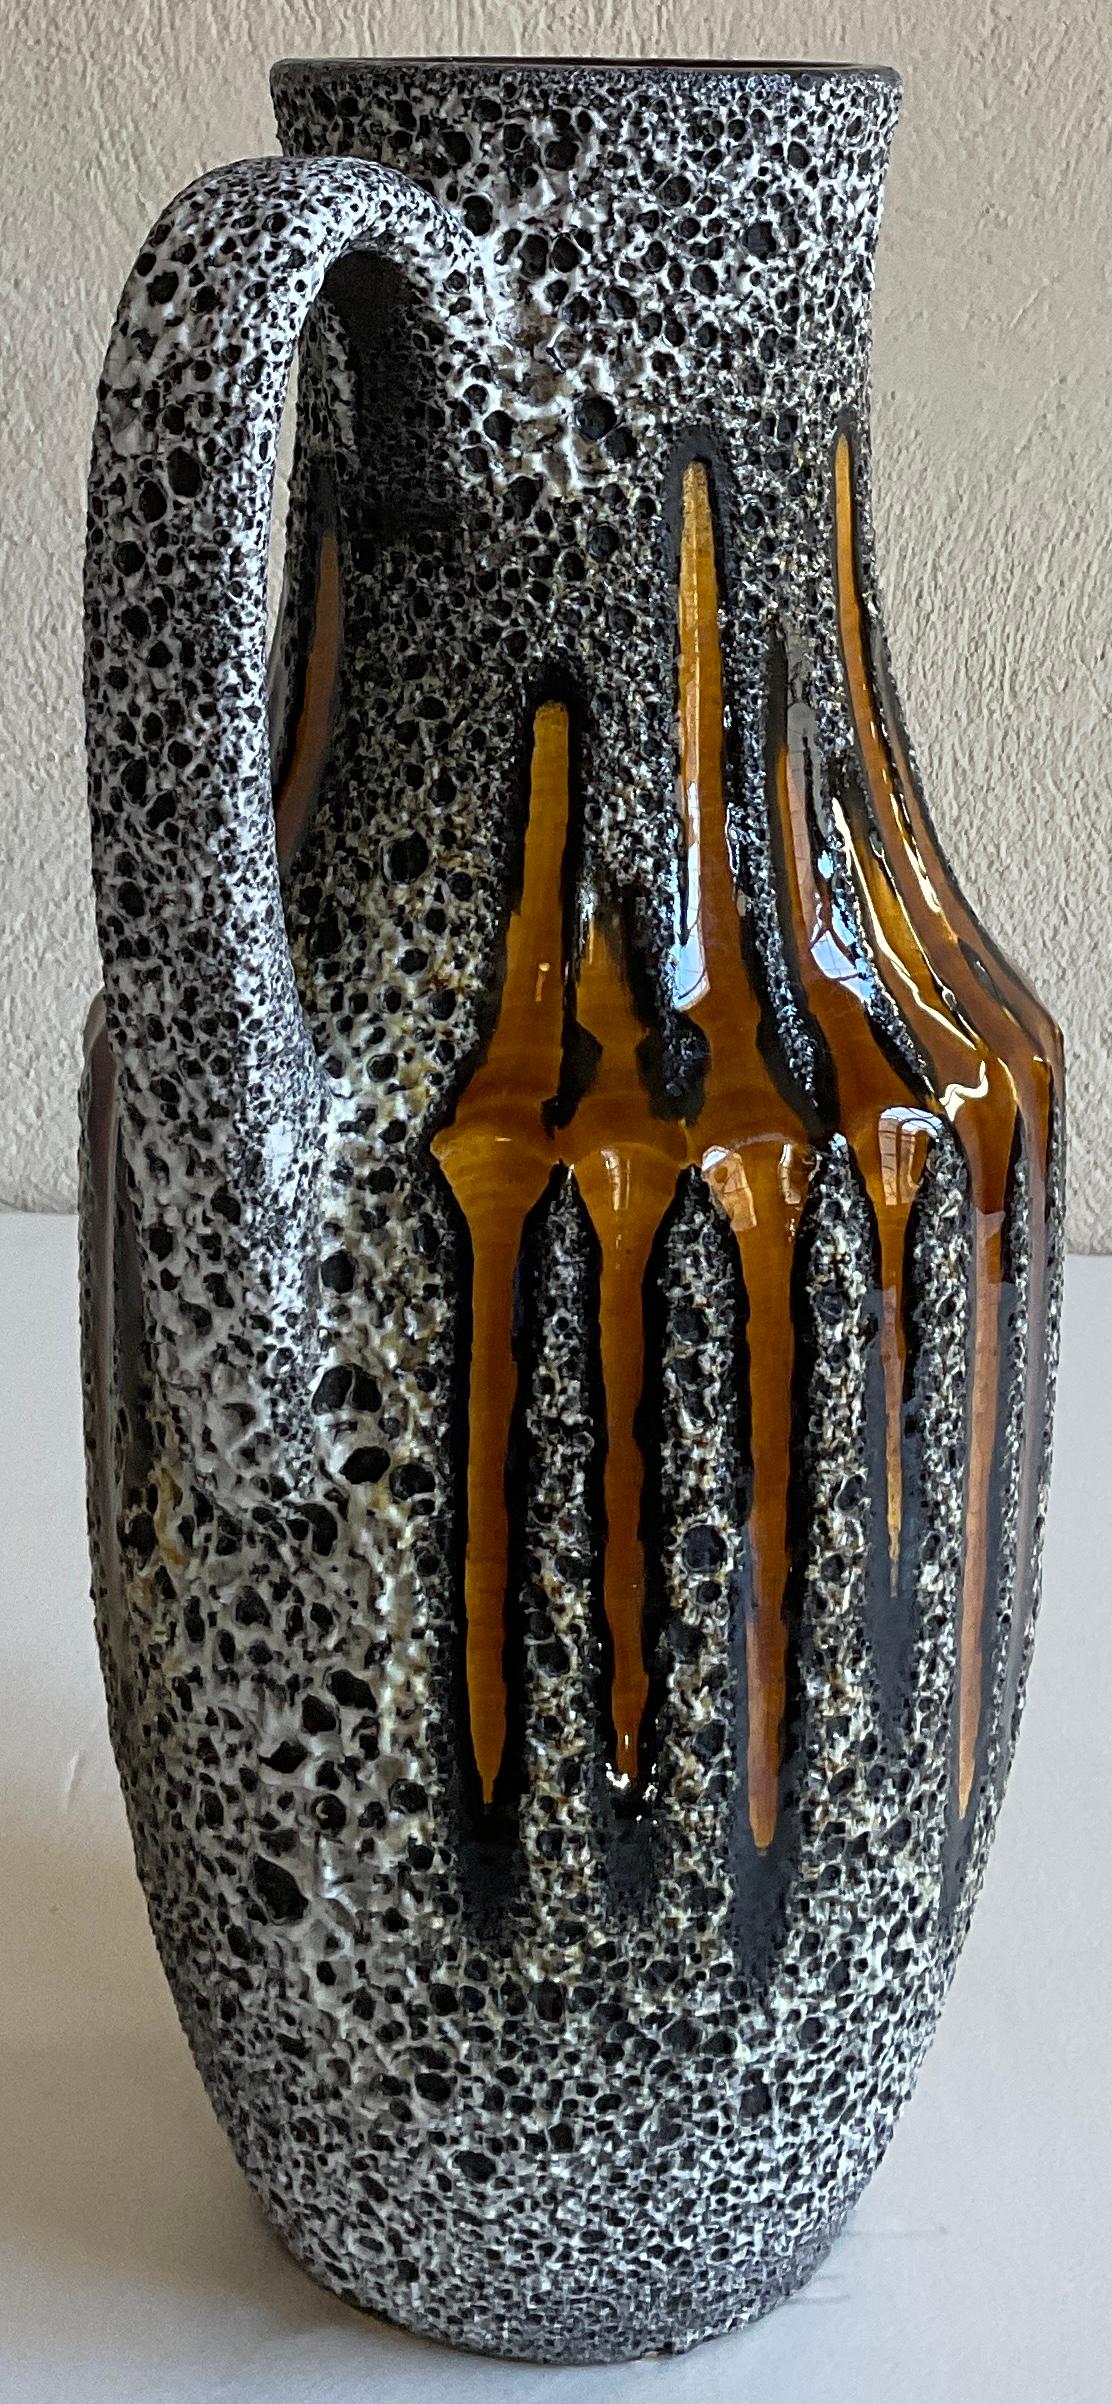 Mid-Century Modern Mid-20th Century West Germany Studio Pottery Pitcher Vase For Sale